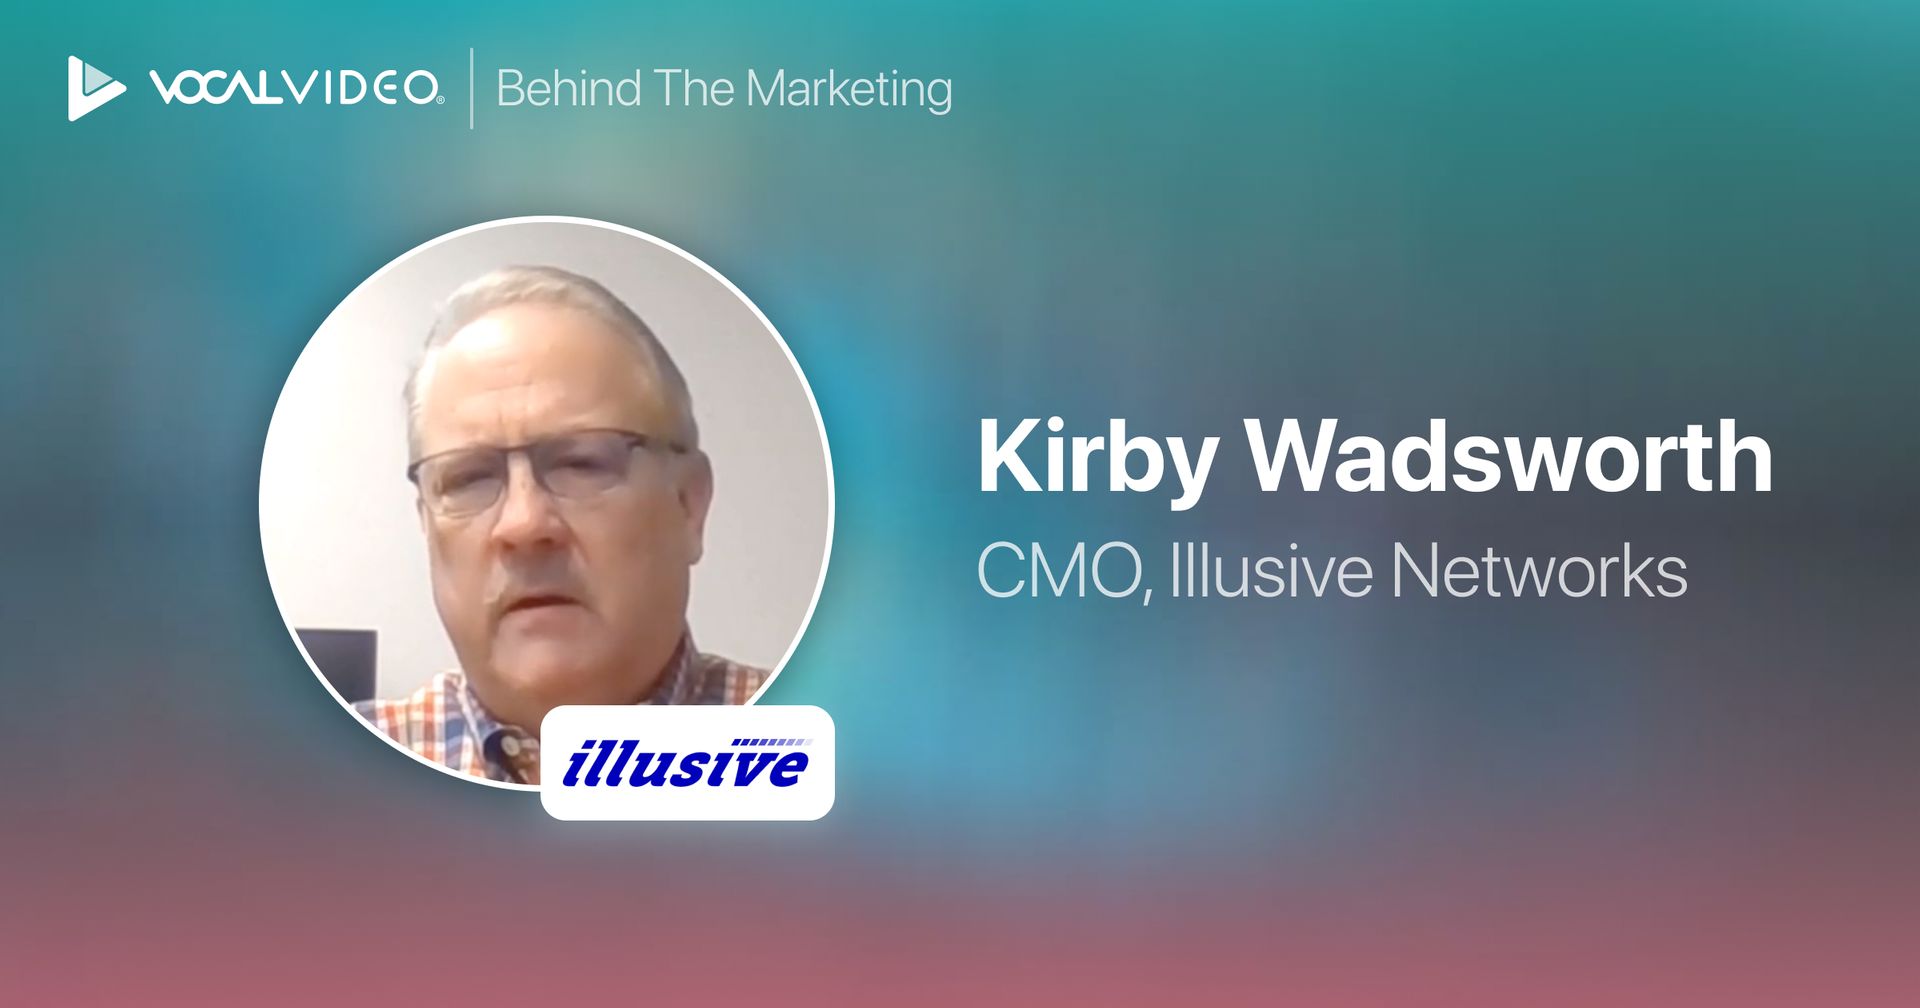 4-time CMO Kirby Wadsworth on How to Get Heard and Get Ahead